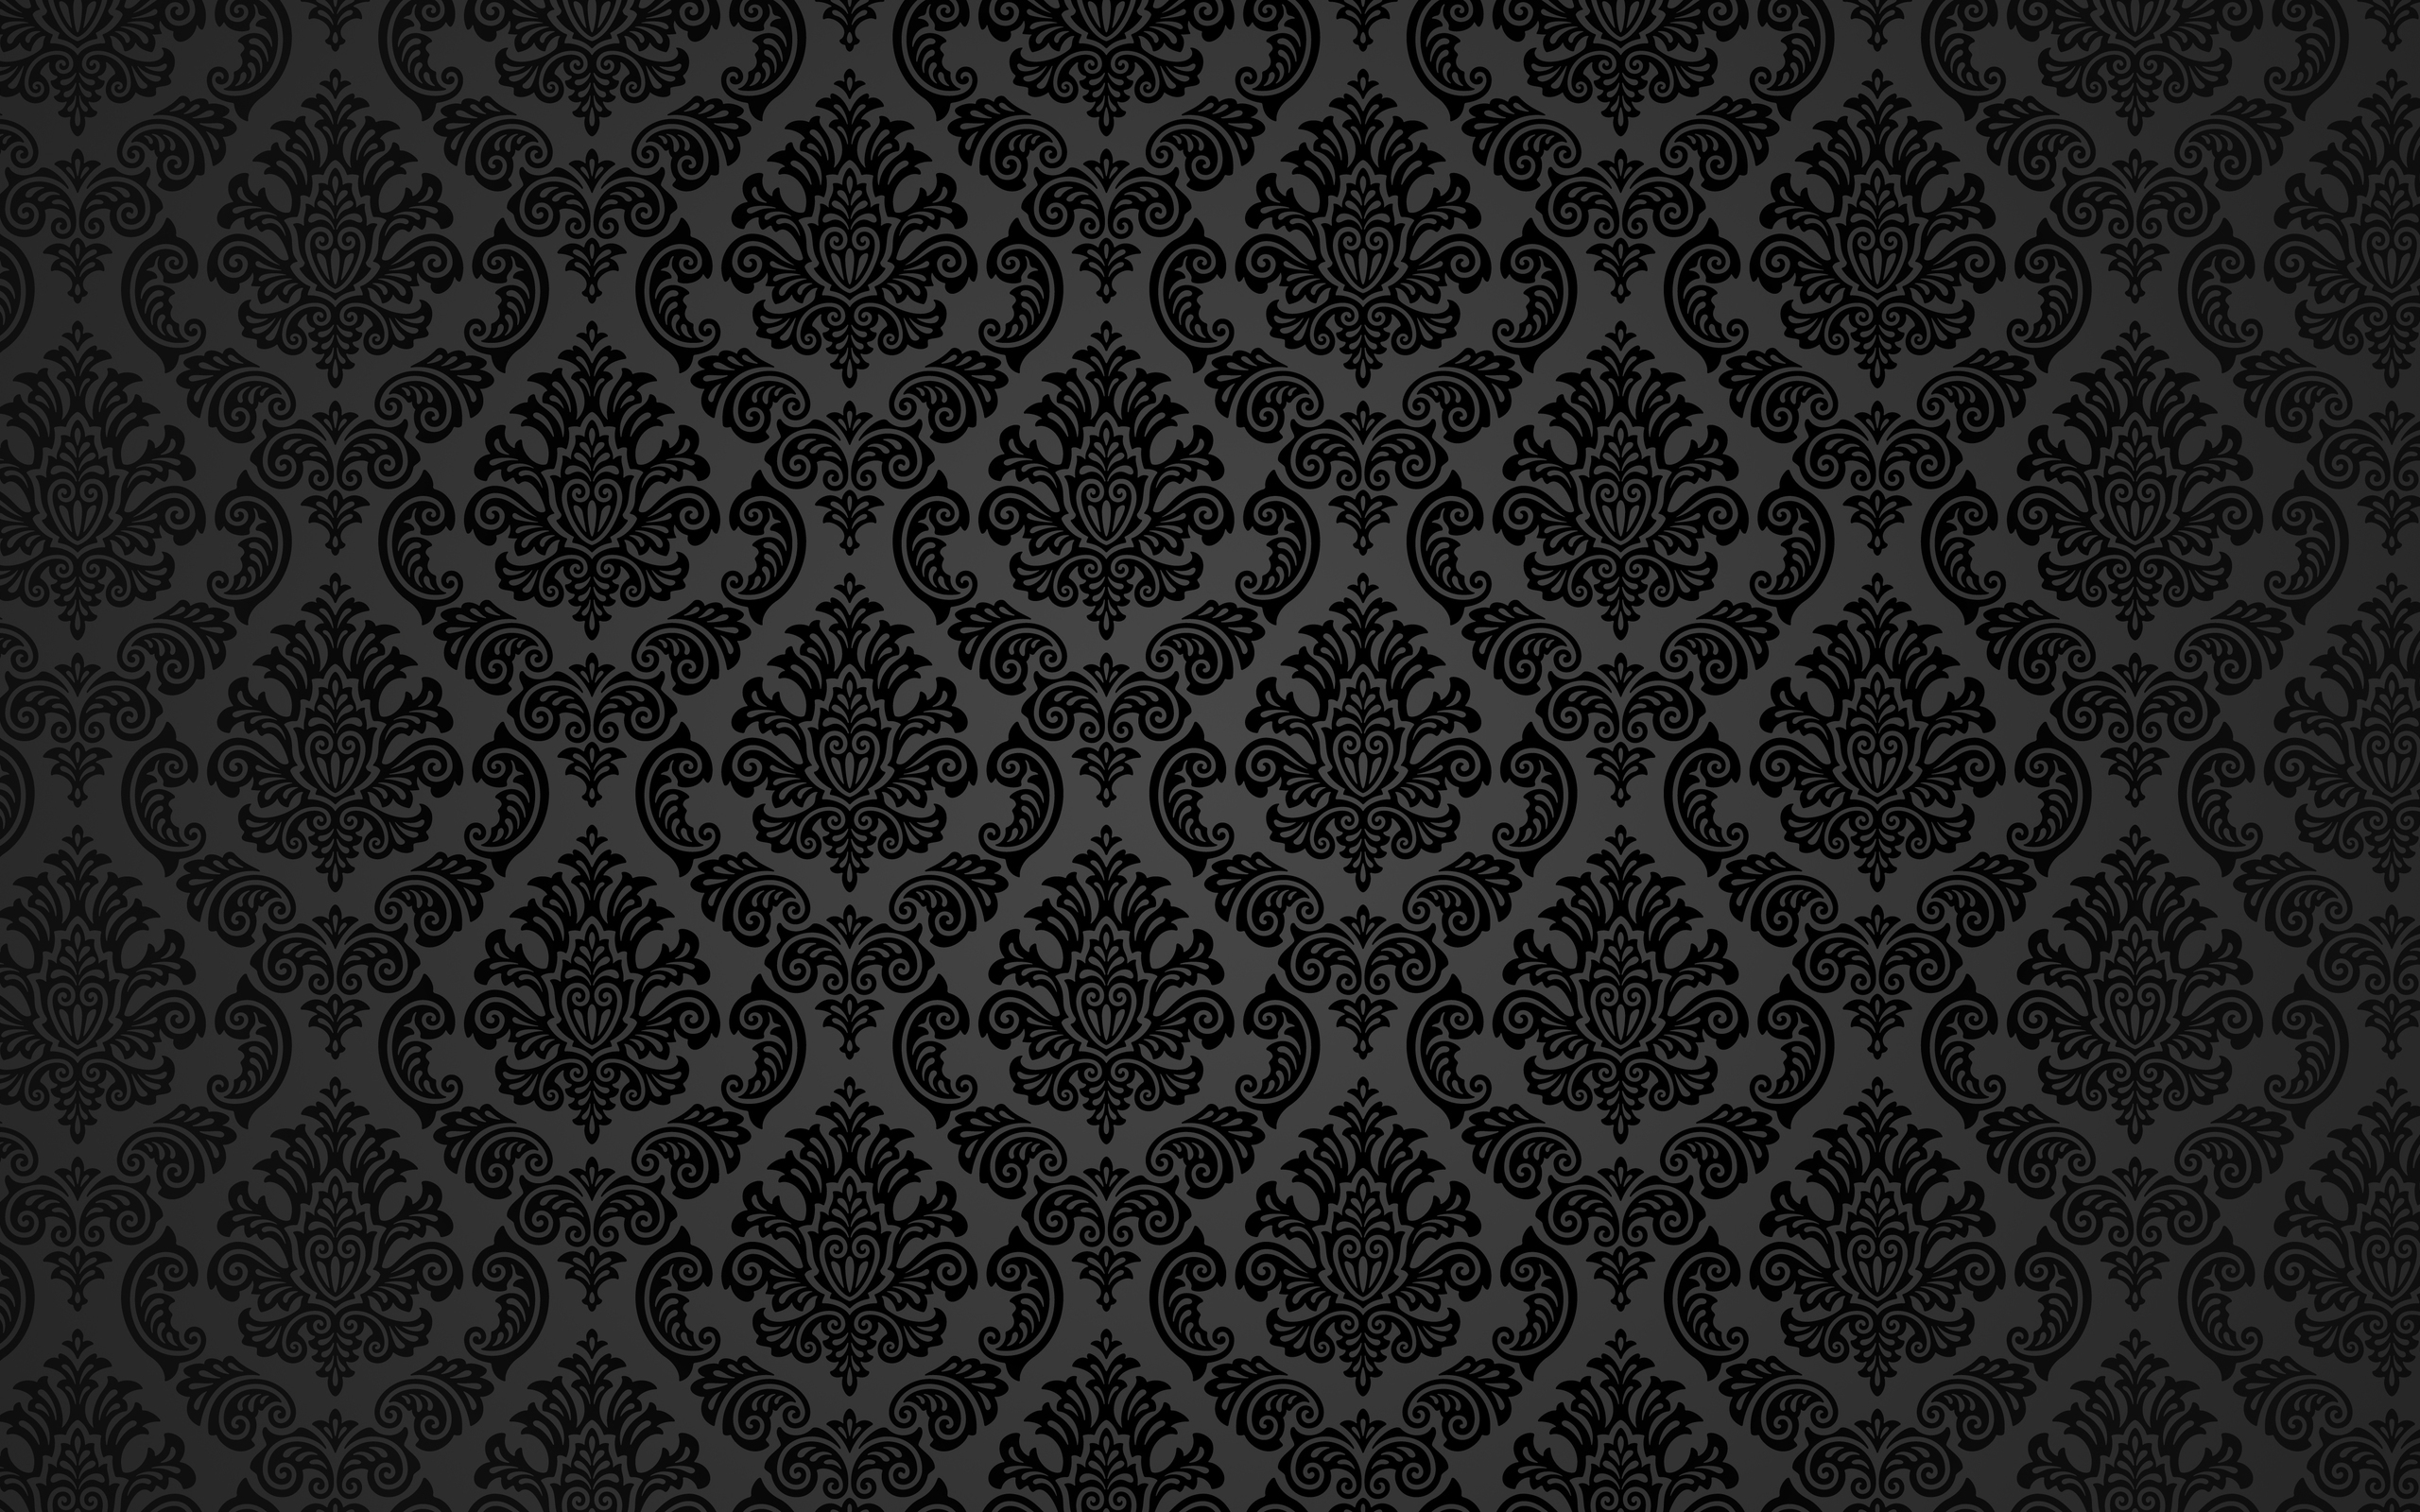 Wallpaper With Ornament Wallpapers And Images Wallpapers HD Wallpapers Download Free Images Wallpaper [wallpaper981.blogspot.com]